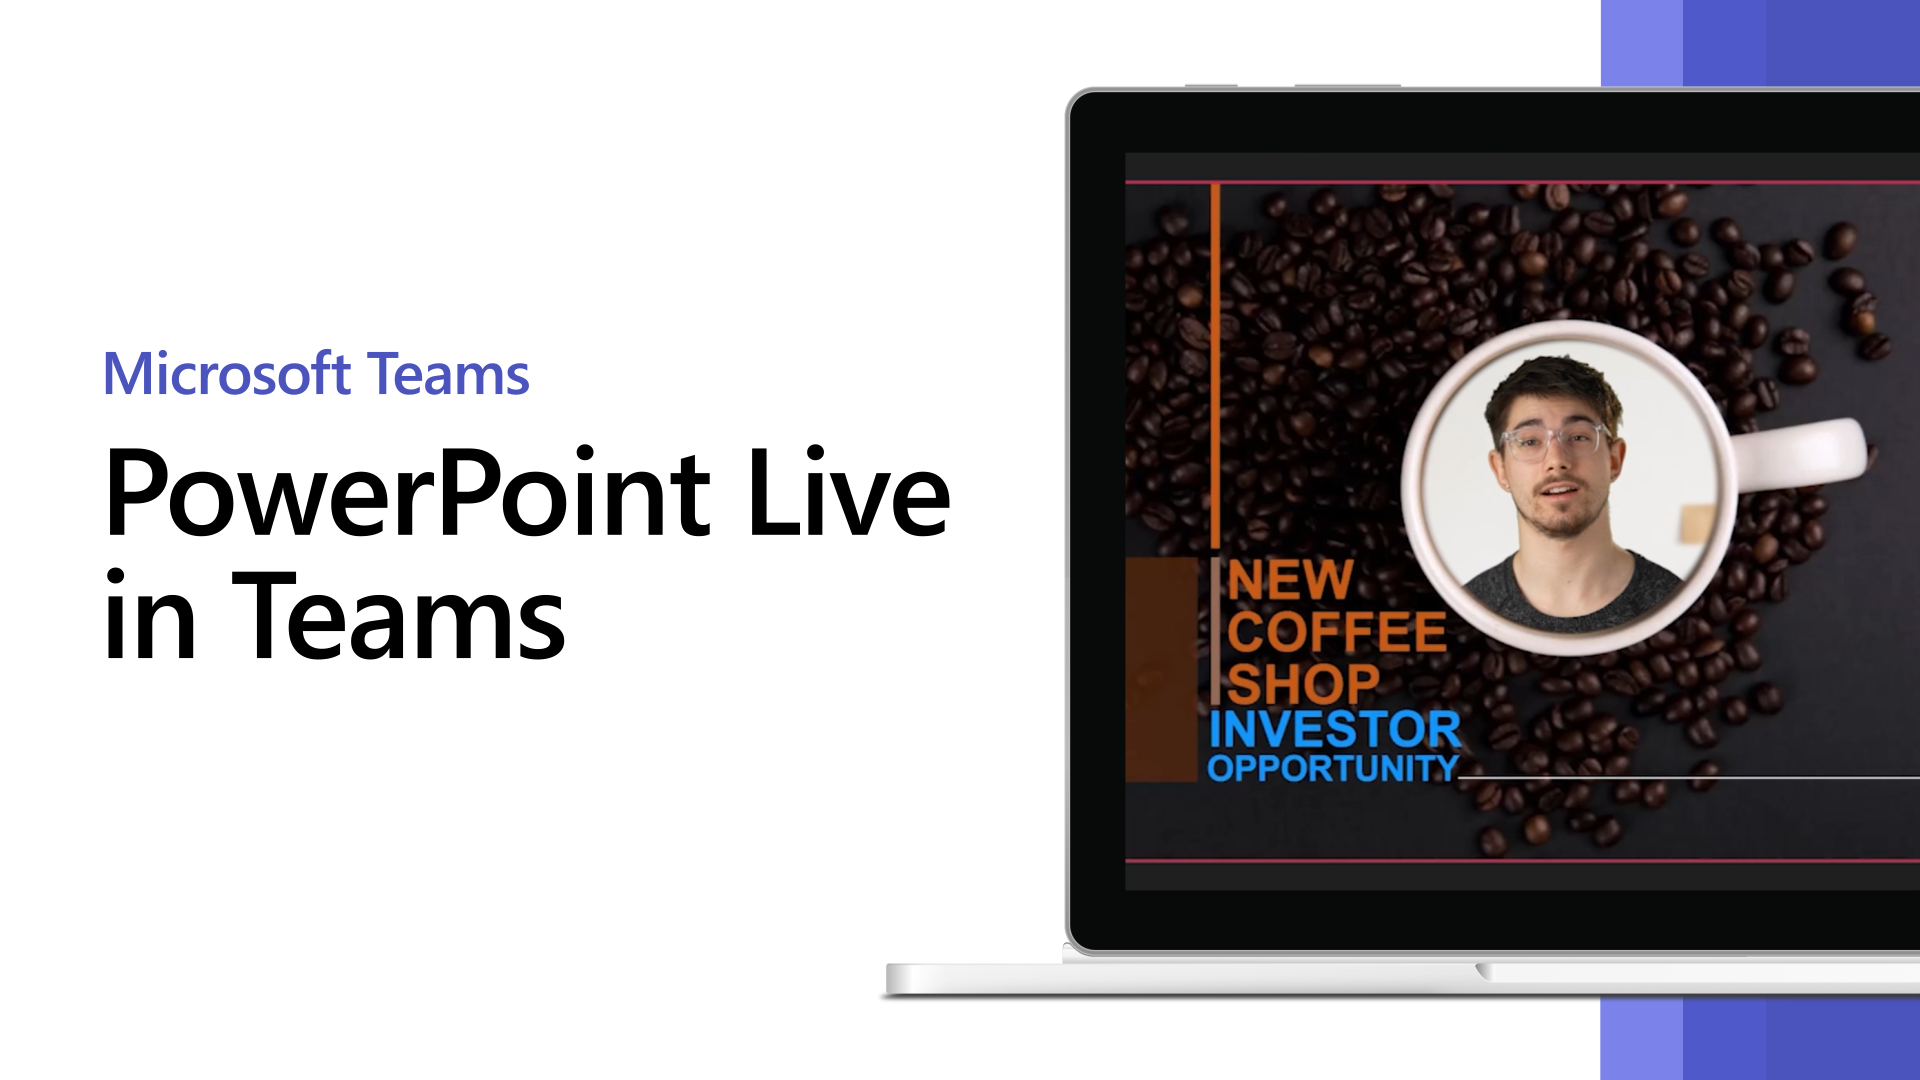 Make presentations more accessible with PowerPoint Live in Microsoft Teams